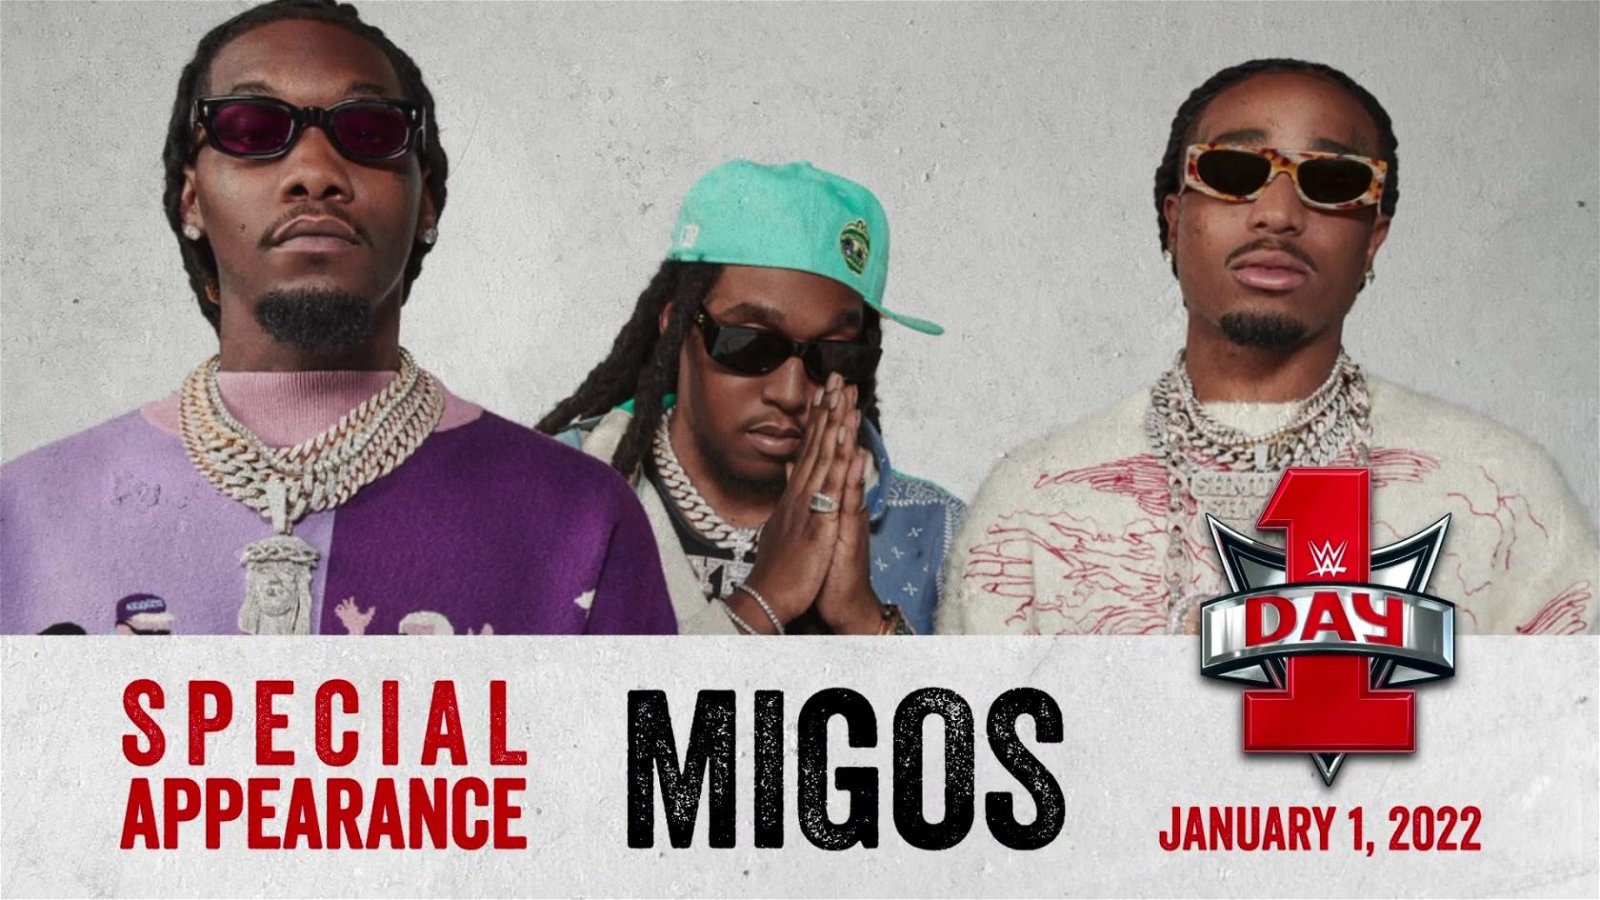 Migos To Make A Special Appearance At WWE Day 1